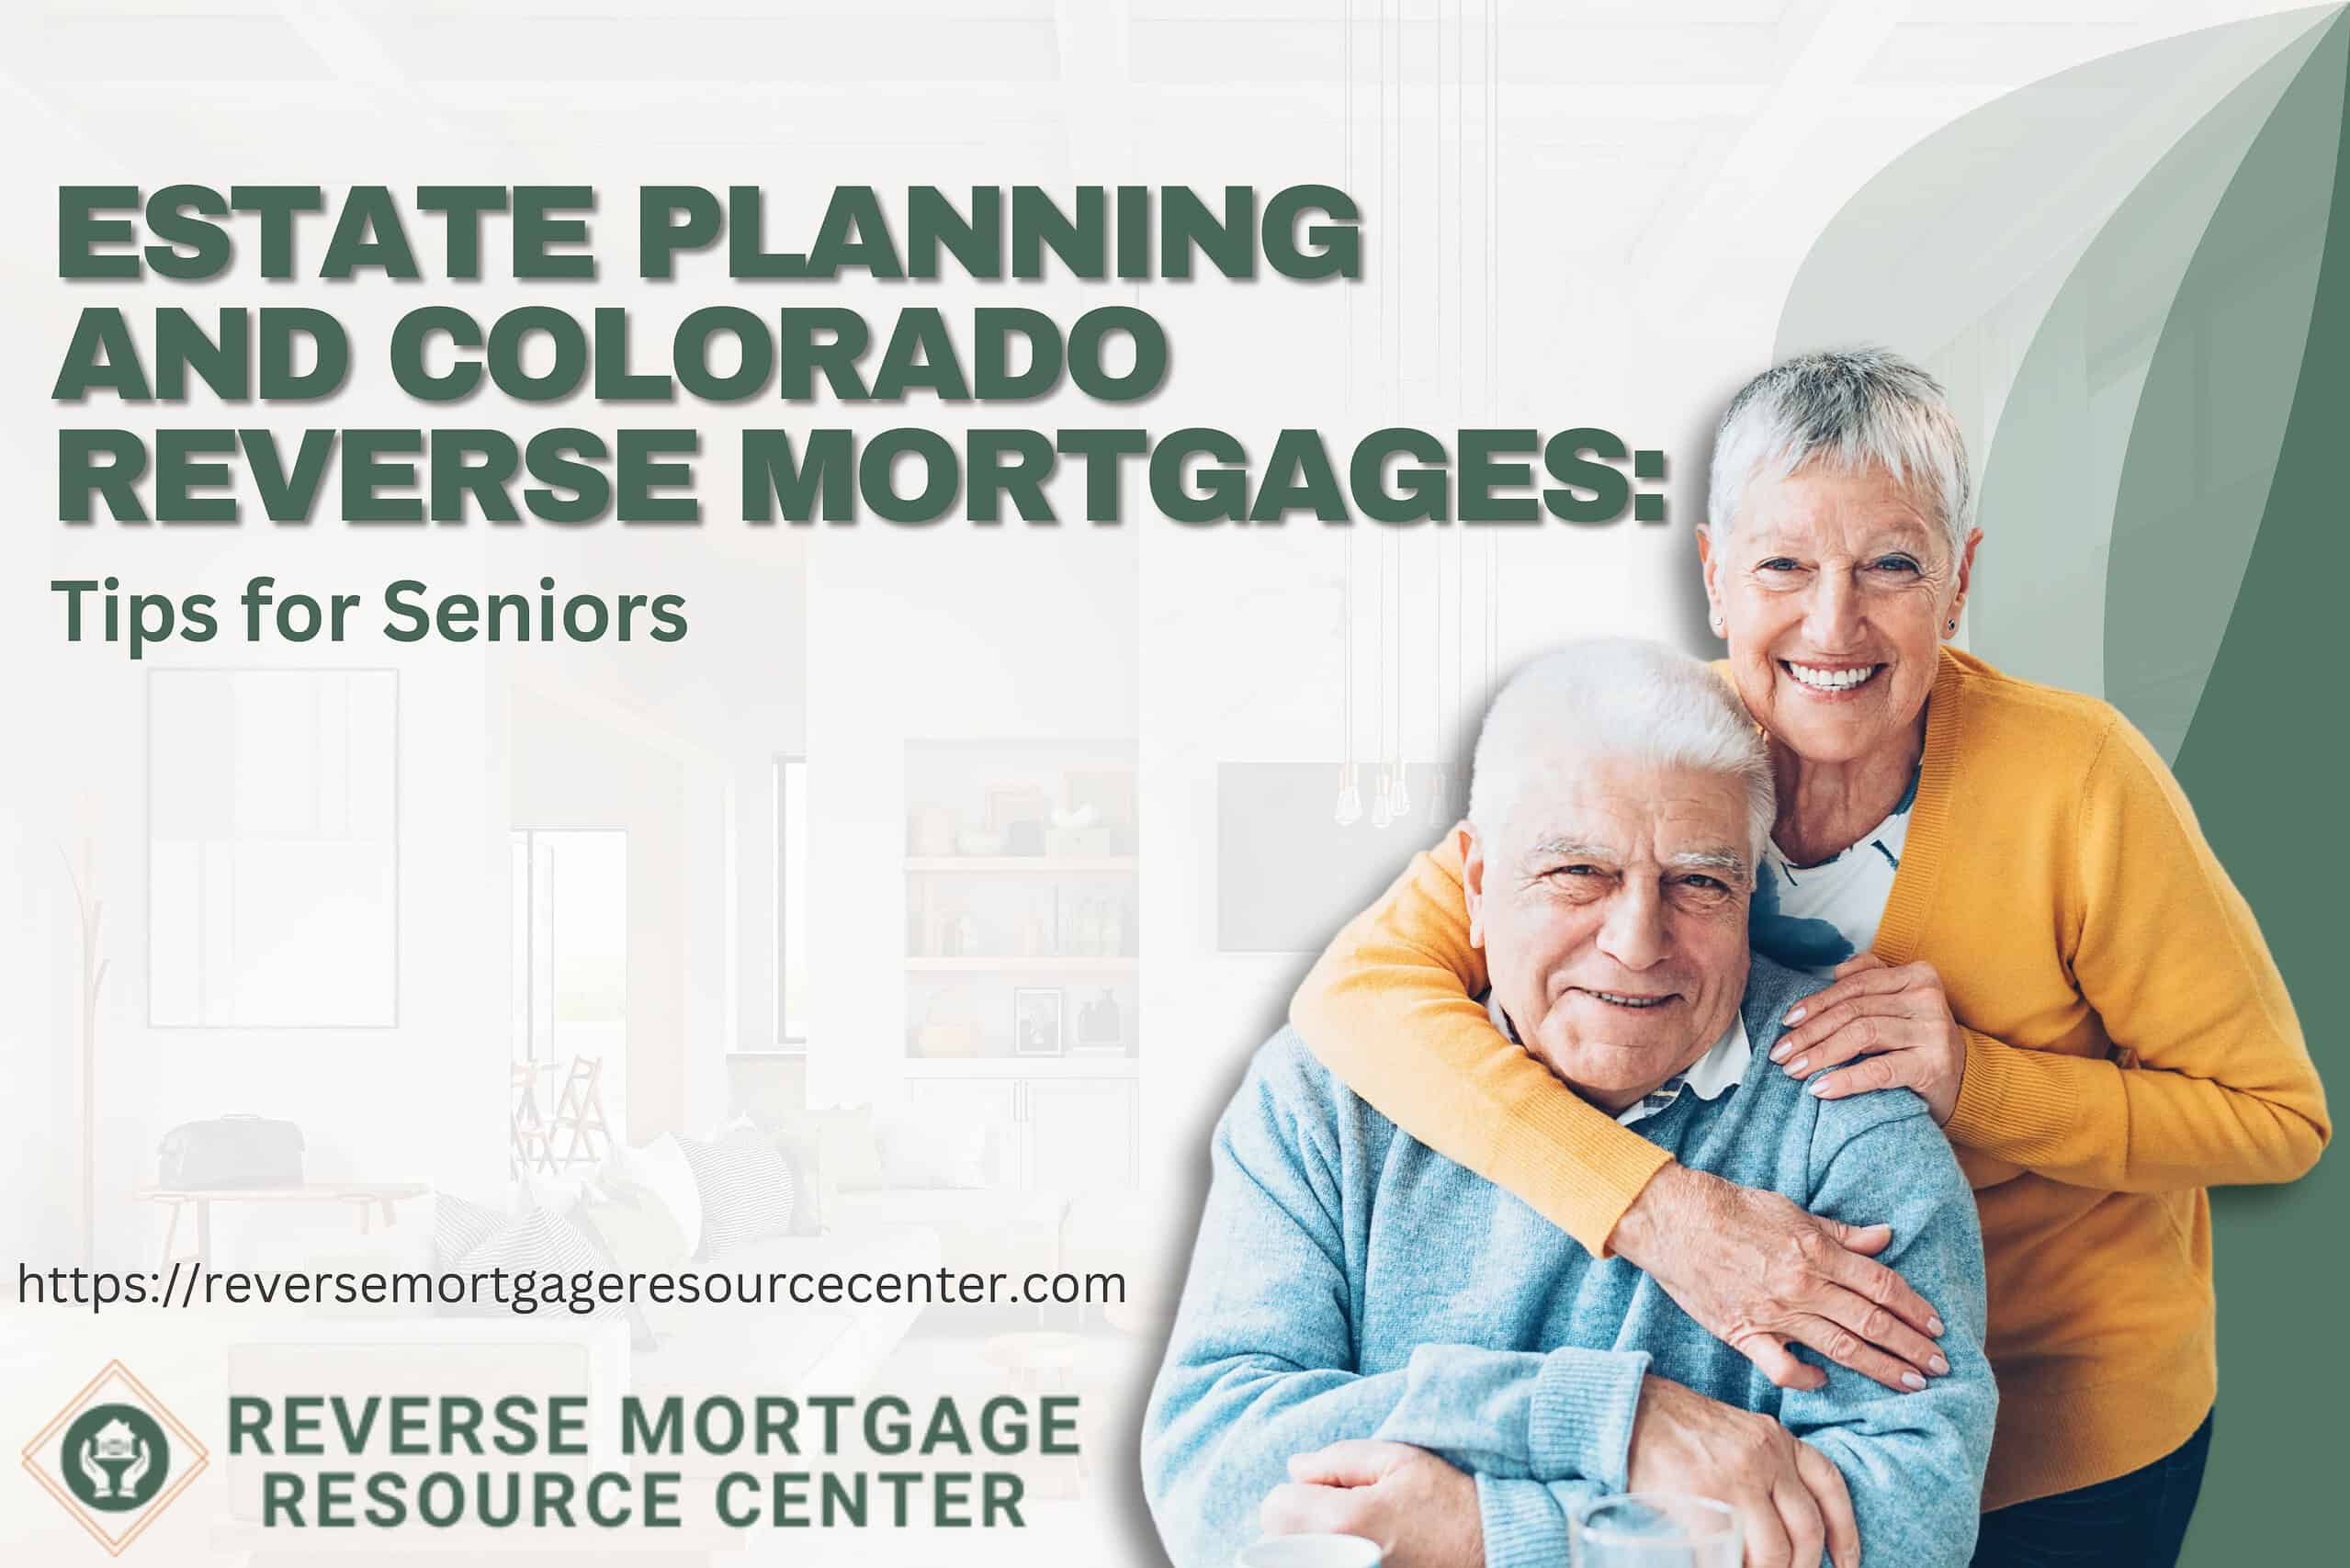 Estate Planning and Colorado Reverse Mortgages: Tips for Seniors